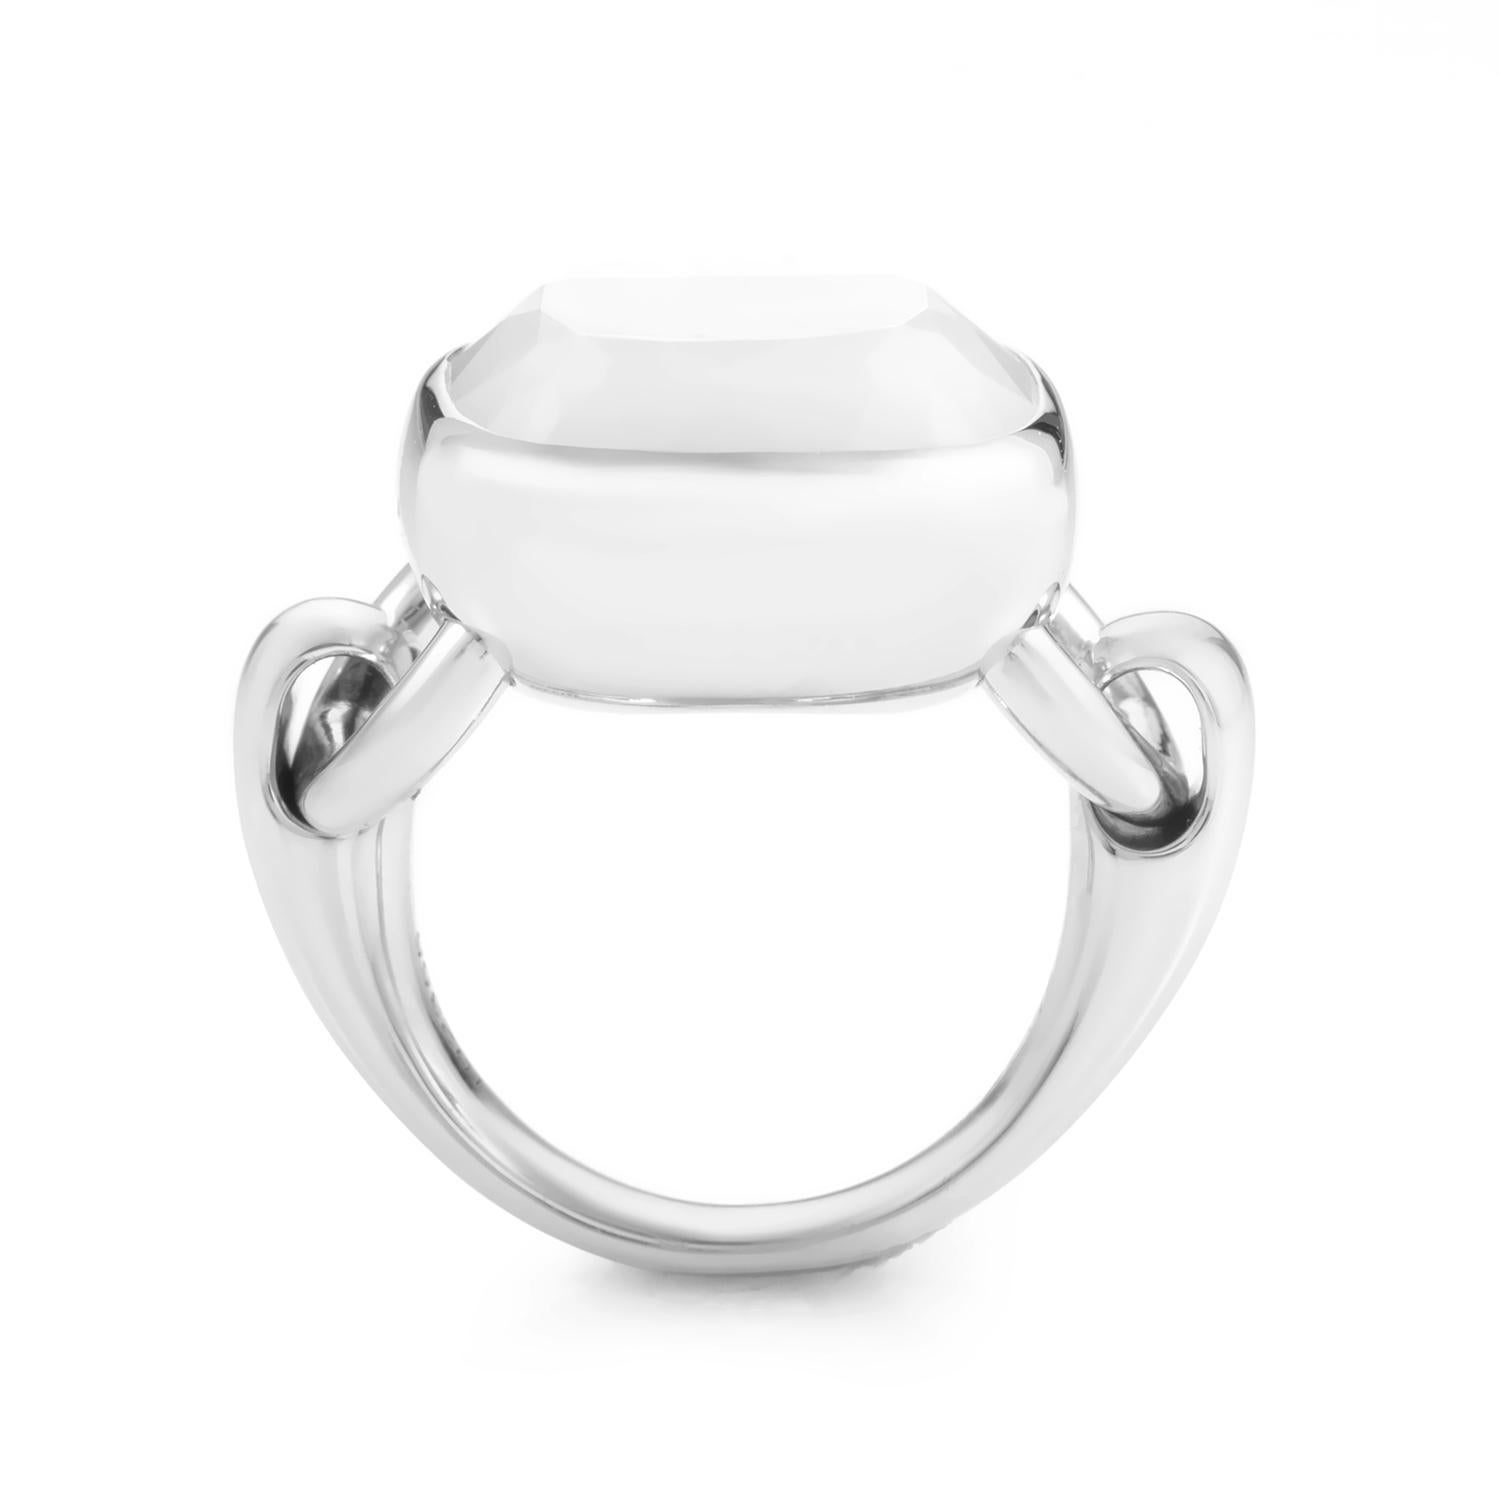 This sublime Poiray ring is delightful in its angelic charm. The ring is made of 18K white gold that is specially designed with hinges for a smooth, movable, cushion shaped bezel setting. A smooth white agate totaling ~10ct ct complements the white